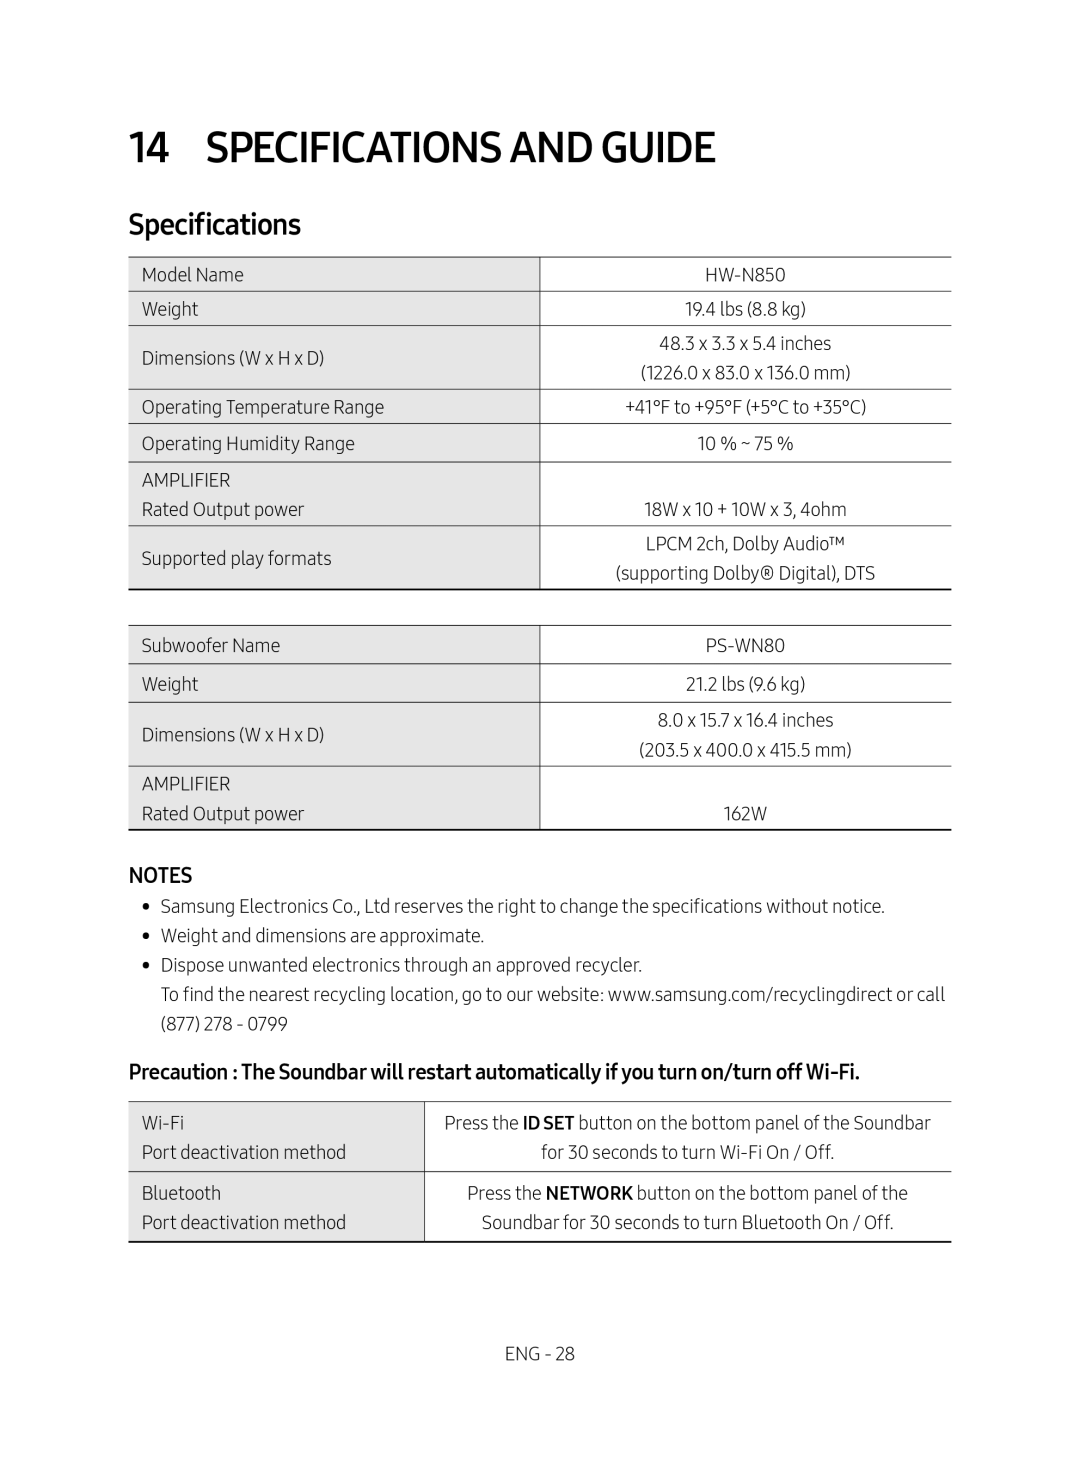 NOTES Specifications